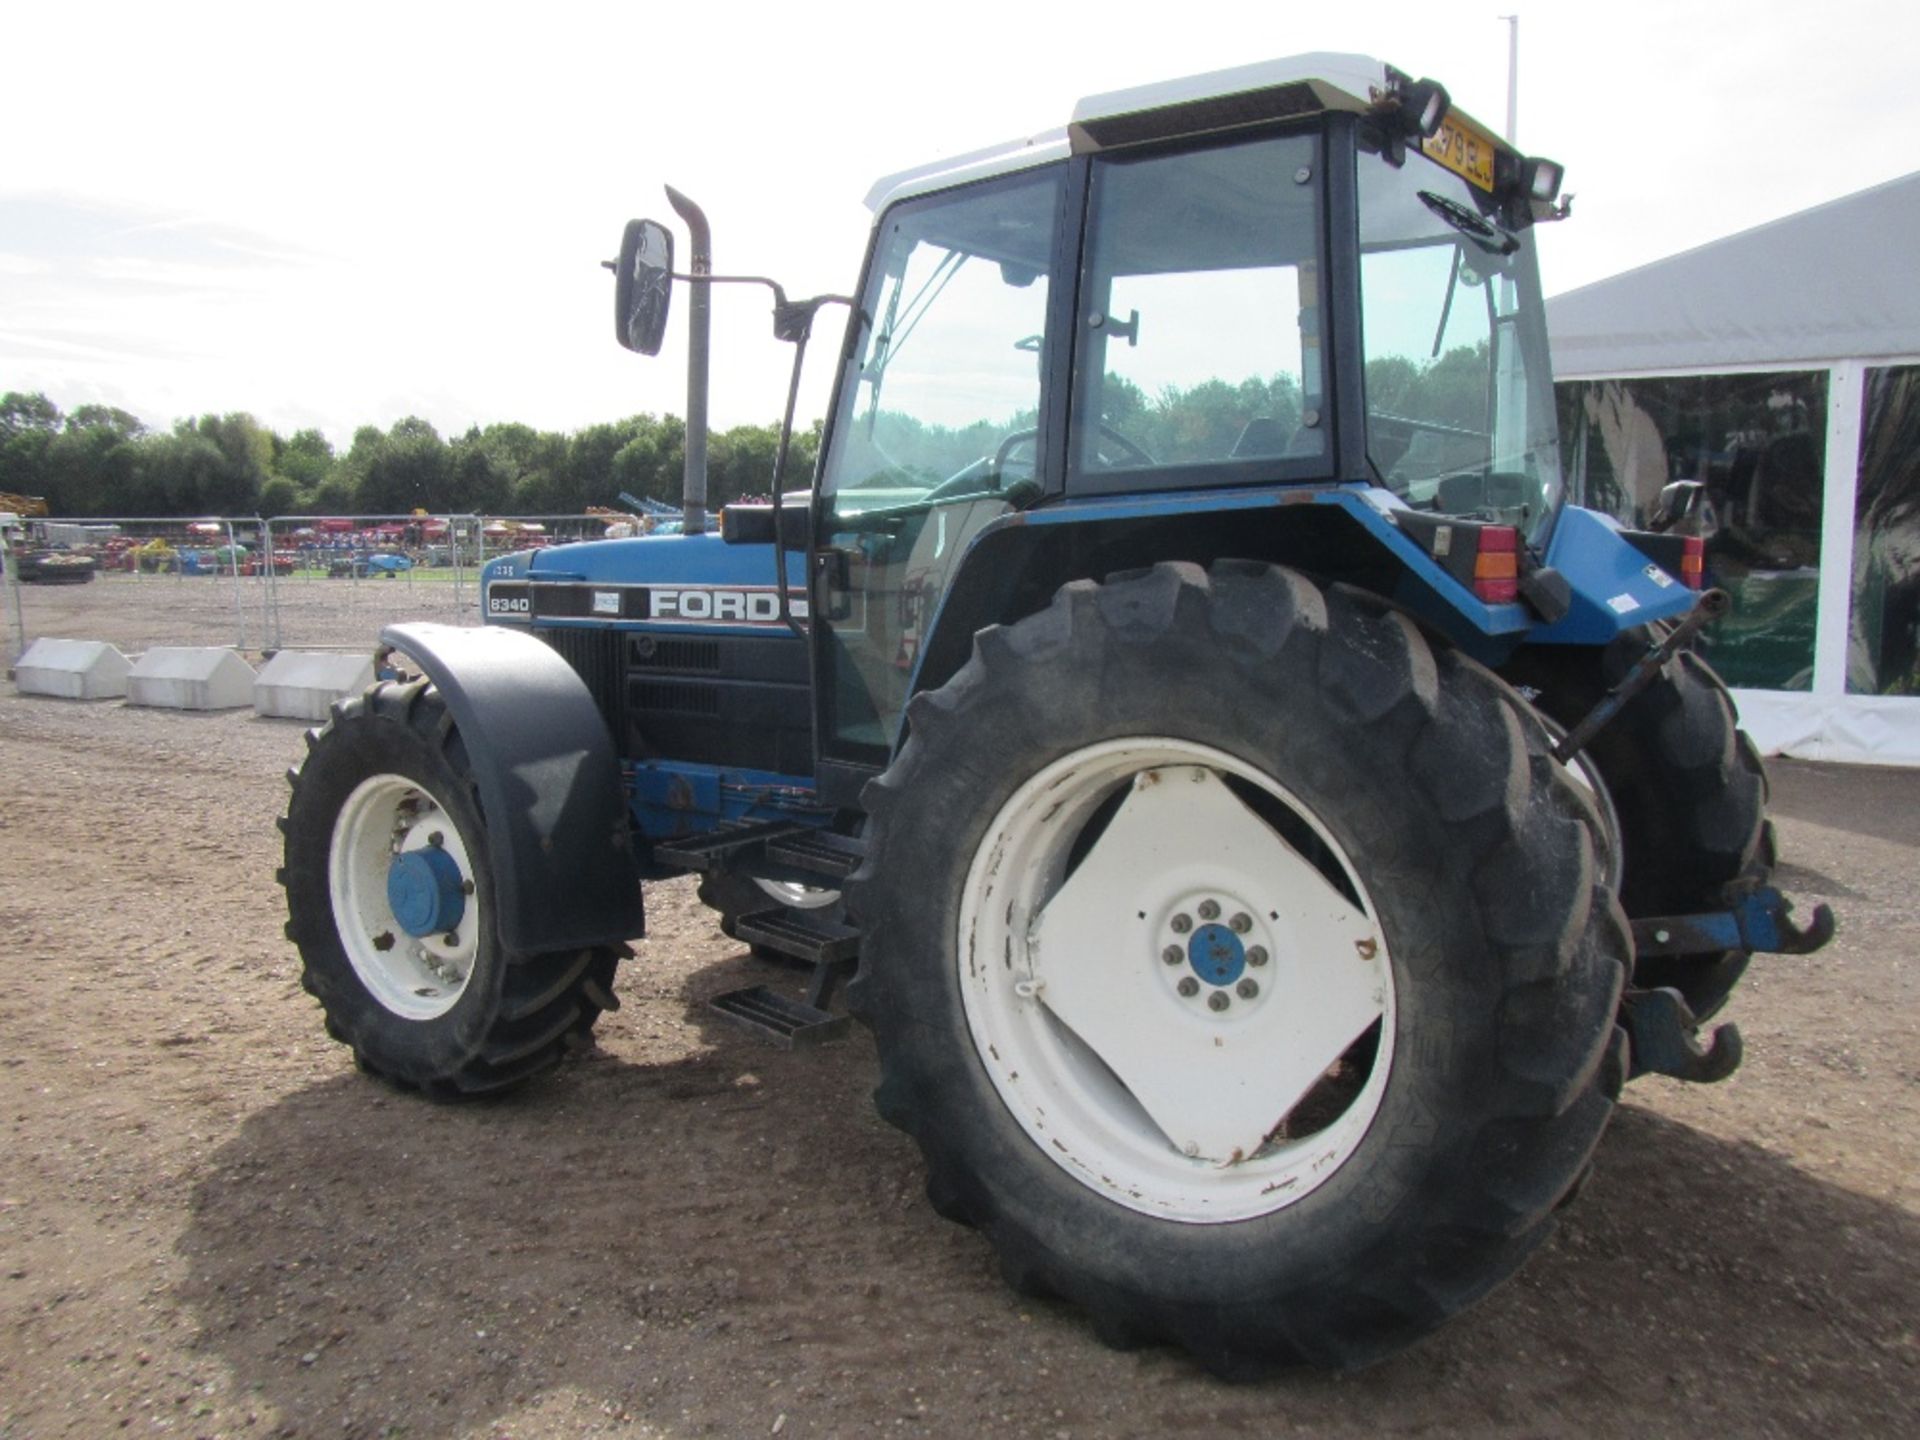 1994 Ford 8340 Powerstar SLE 4wd Tractor with Front Linkage & PTO Reg. No. L379 ELJ Ser No BD79914 - Image 10 of 18